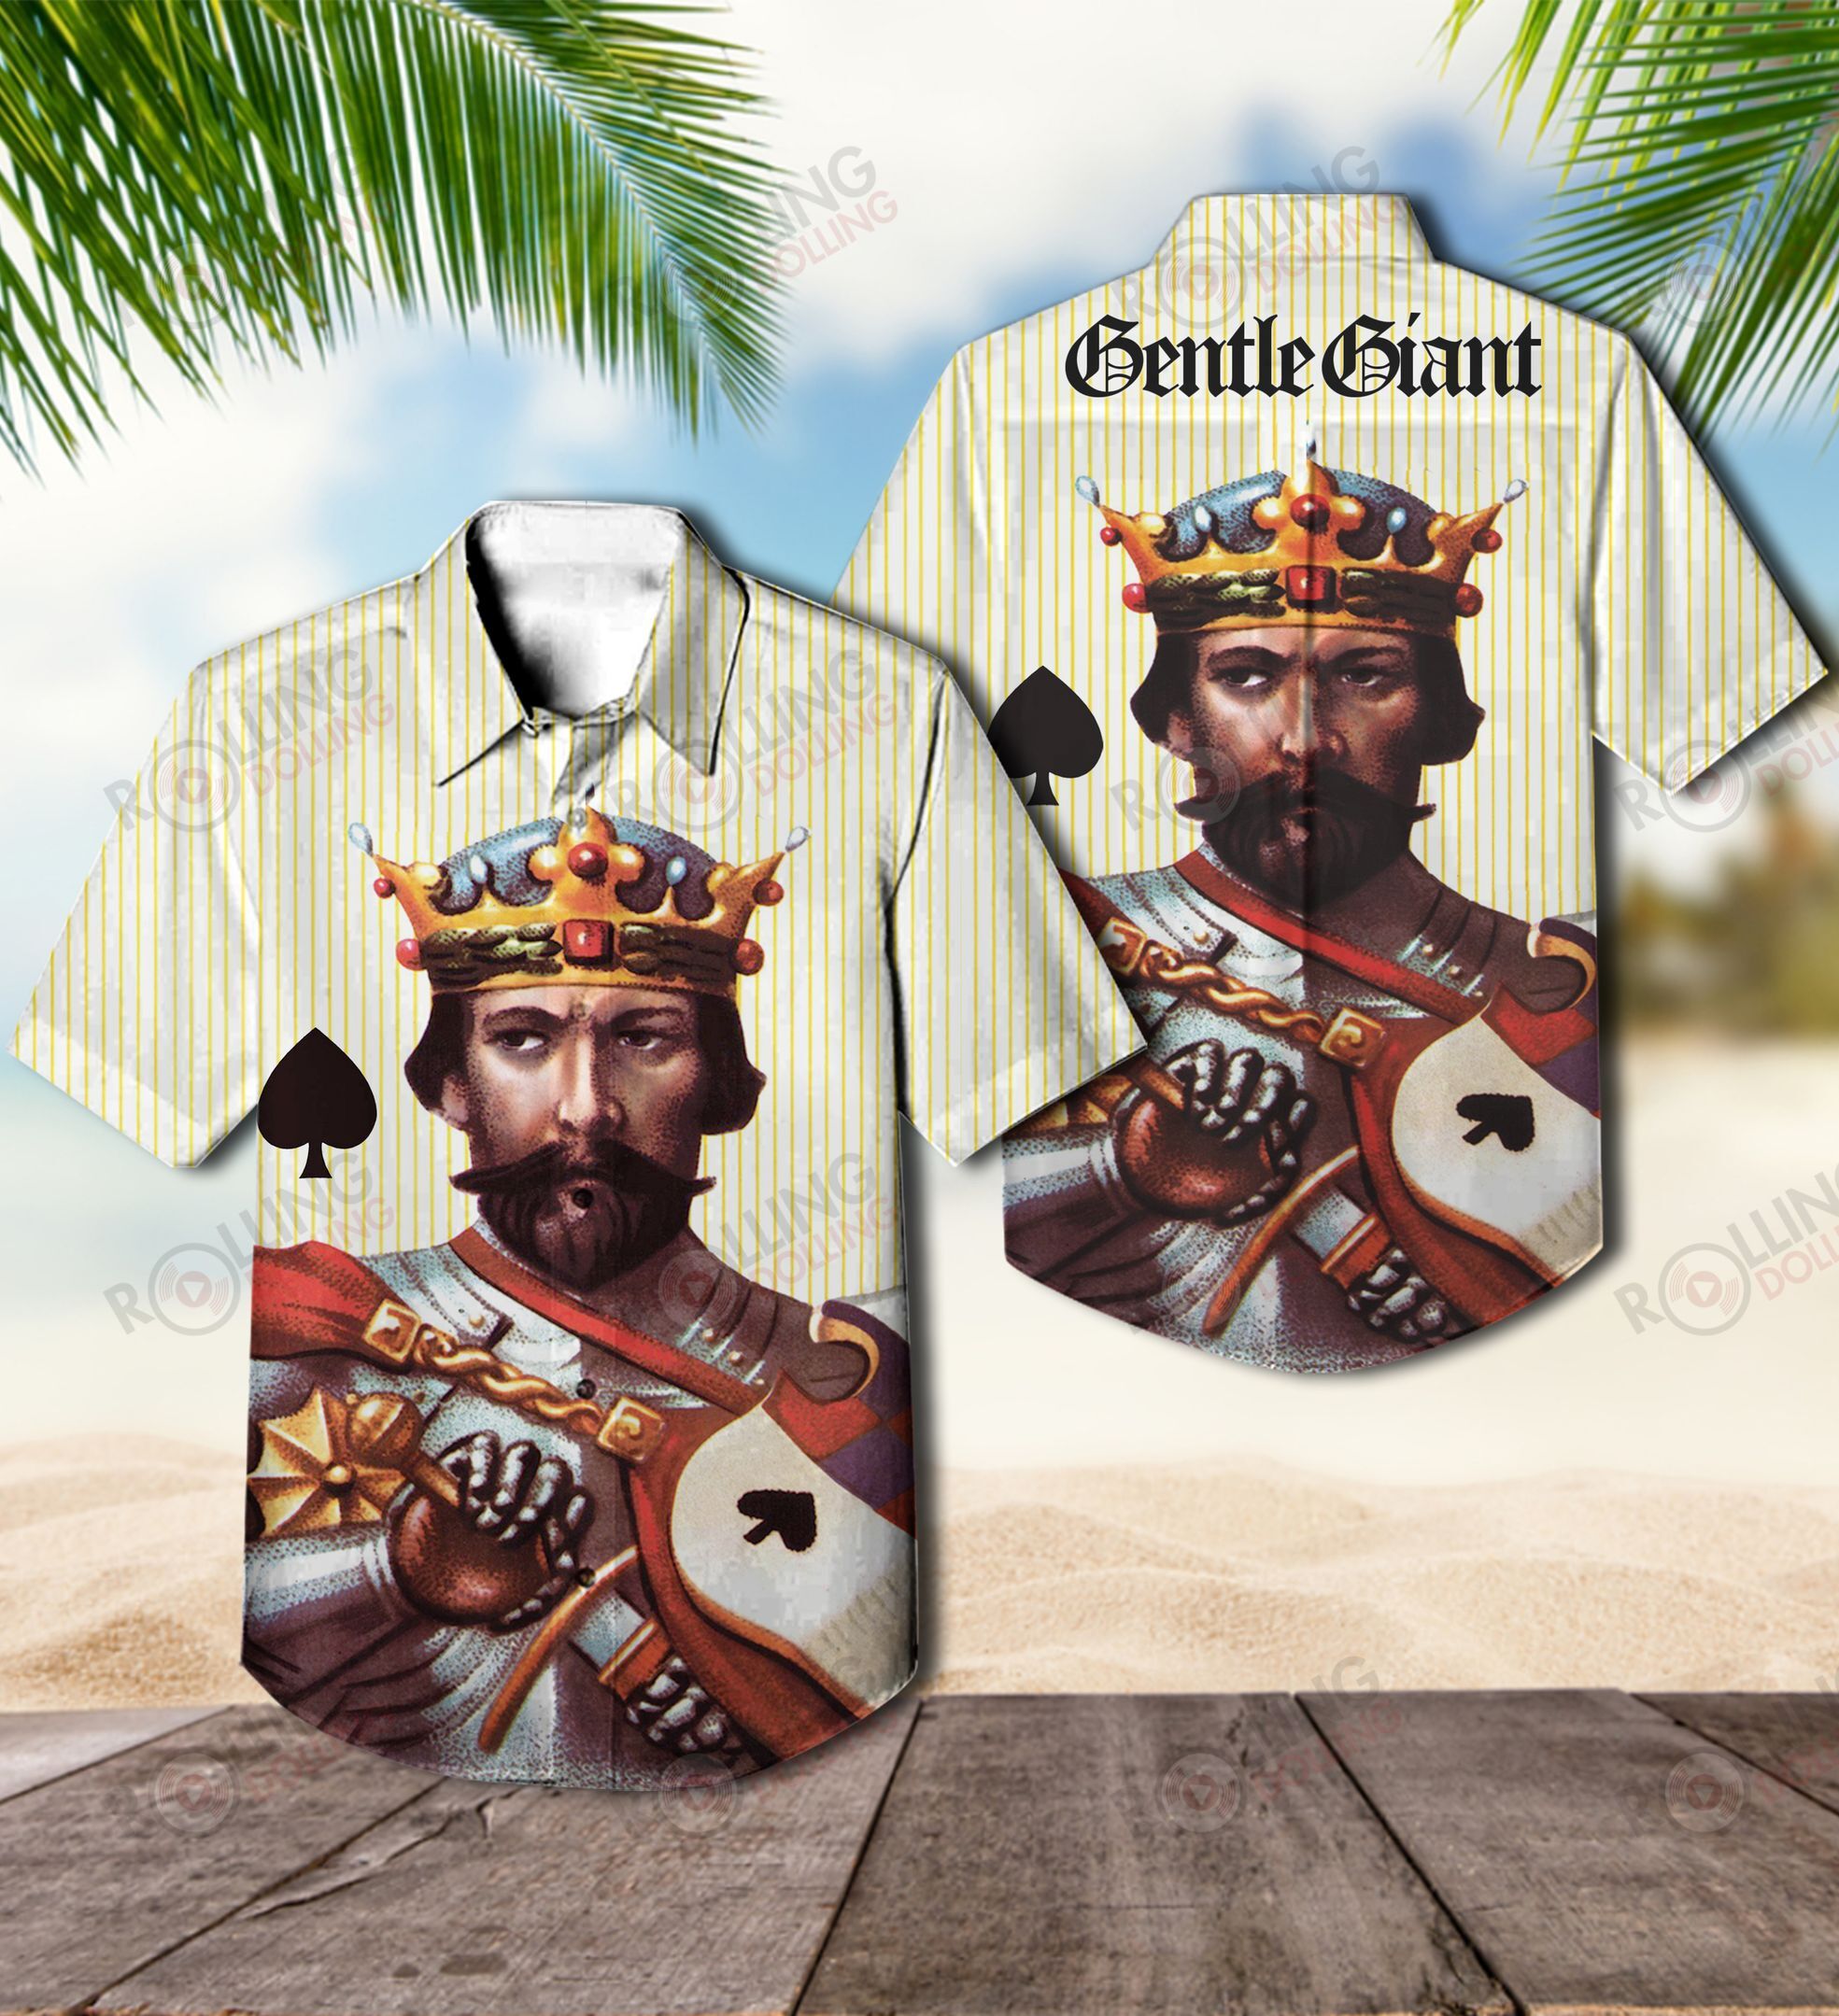 For summer, consider wearing This Amazing Hawaiian Shirt shirt in our store 72